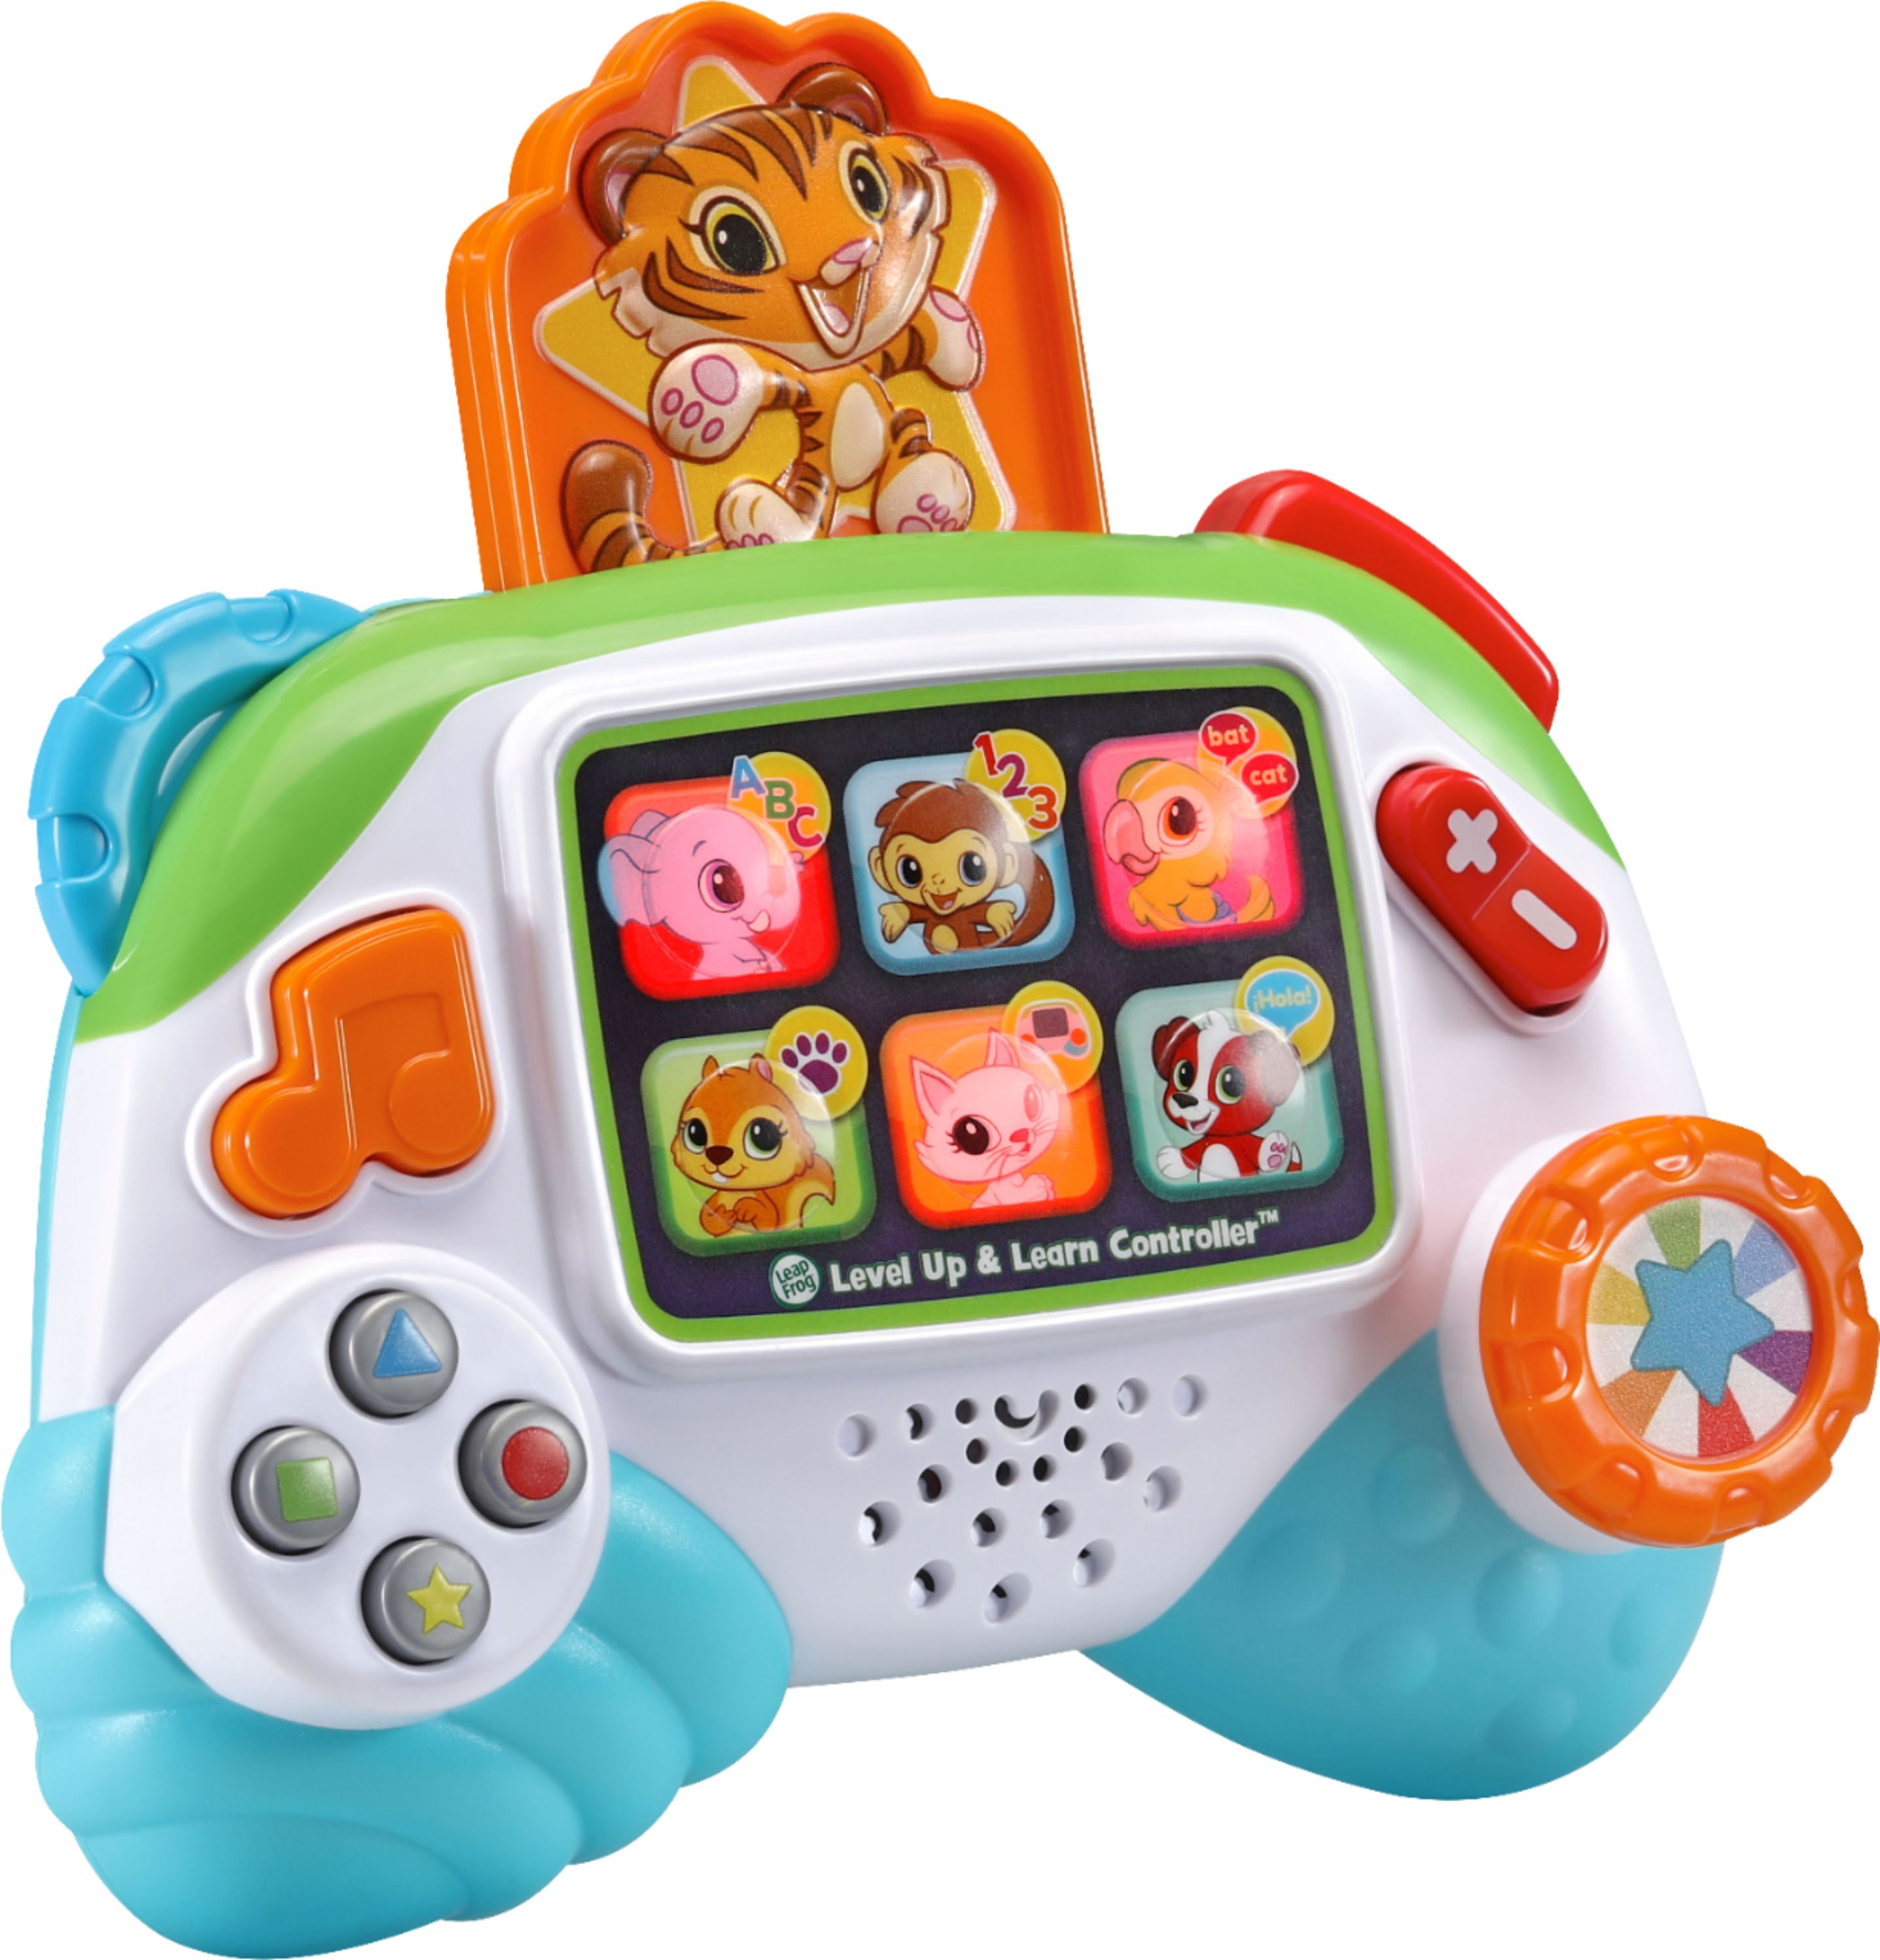 Angle View: LeapFrog - LeapFrog® Level Up & Learn Controller™ - Multicolor